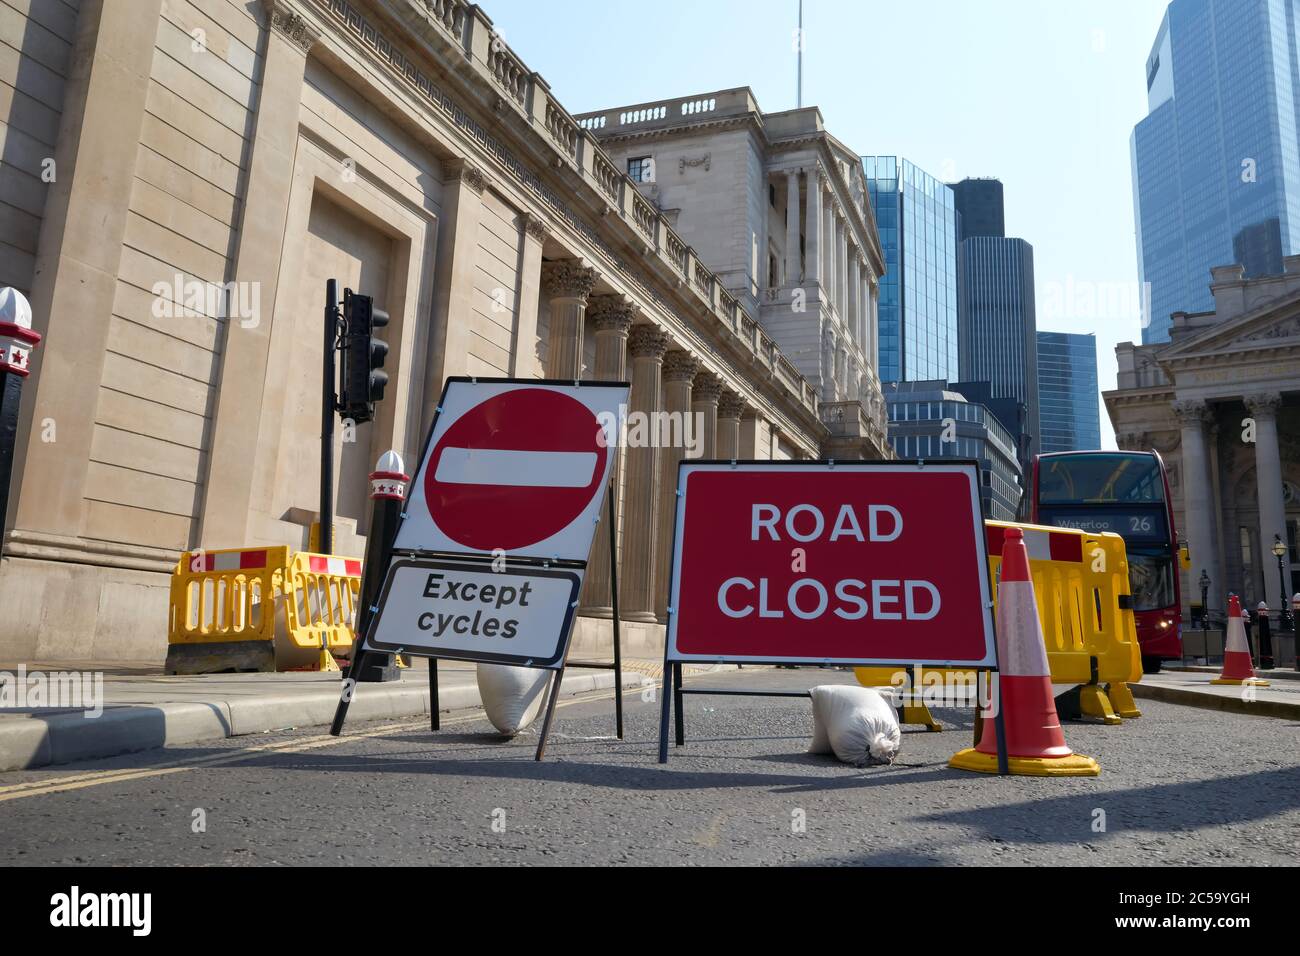 Photograph of the Bank of England with 'Road Closed' and ' No Entry except cycles' sign in front of building. Stock Photo